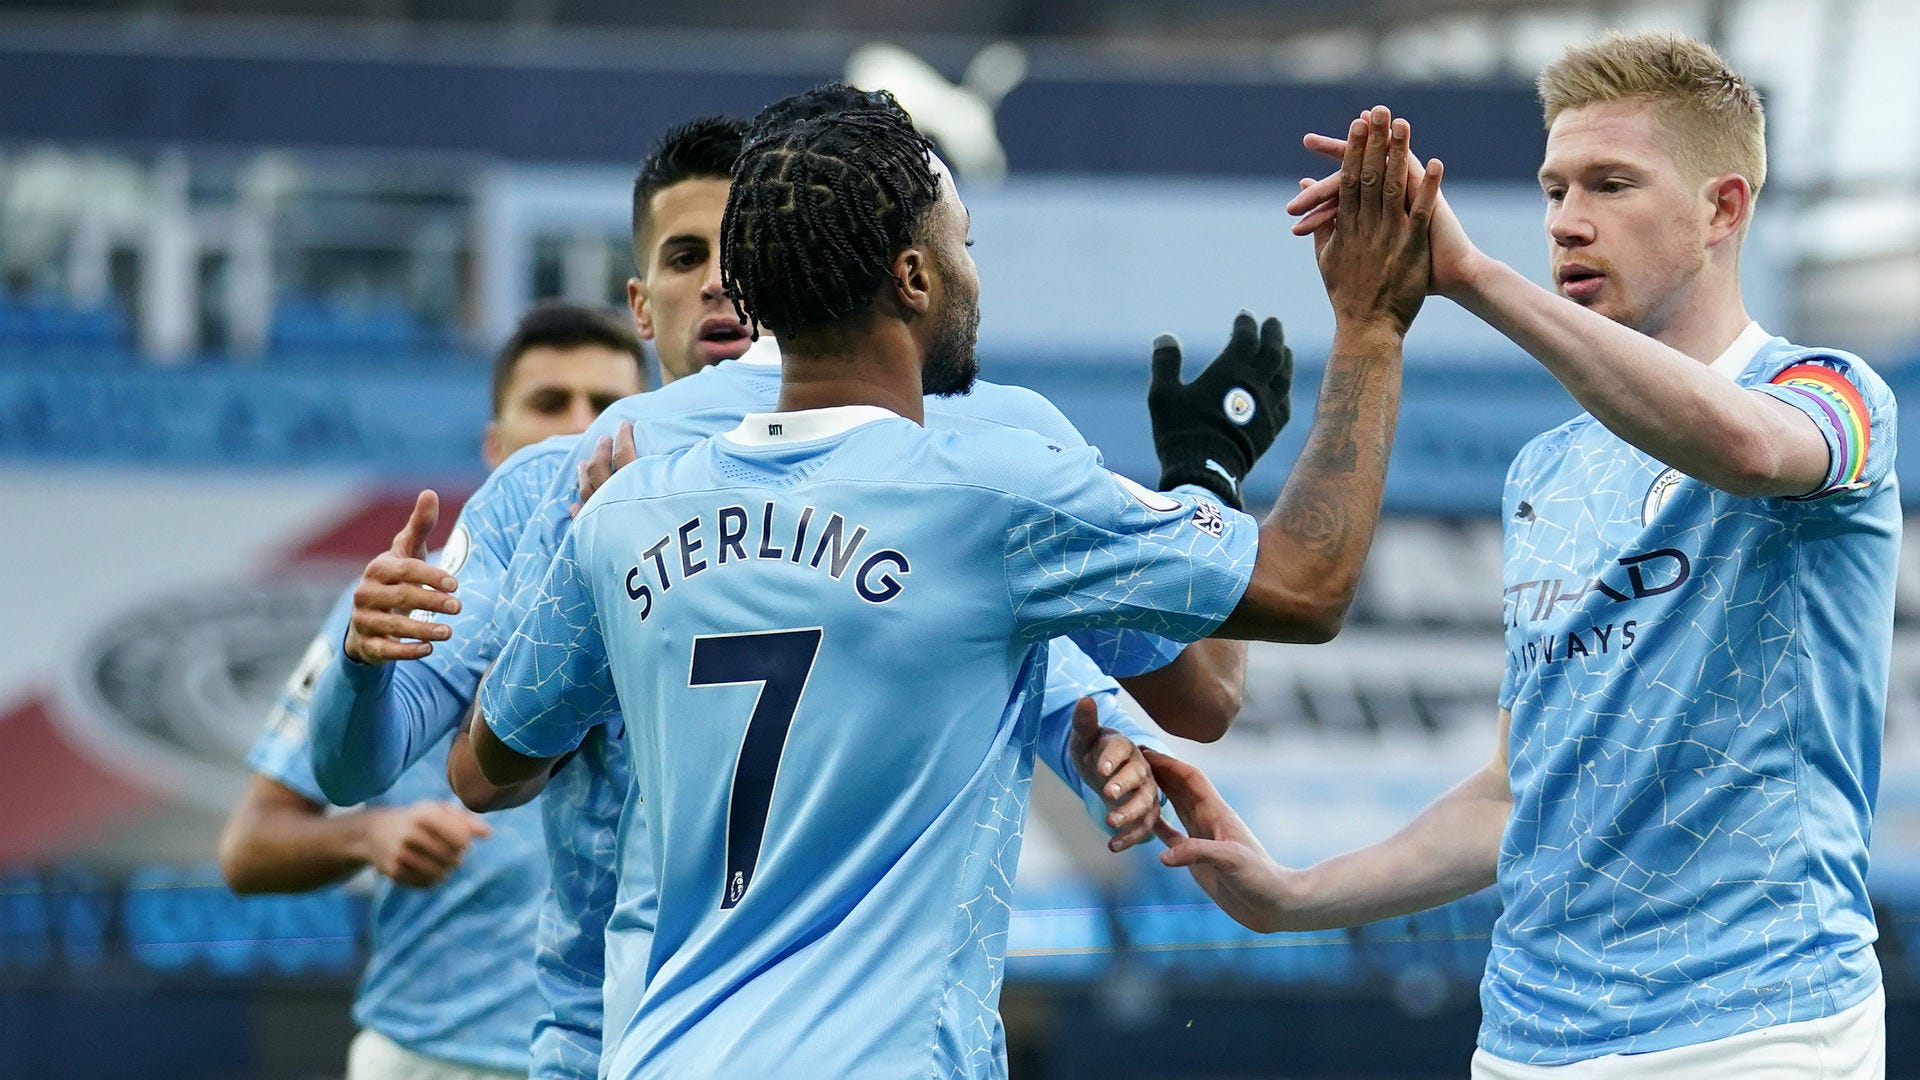 Manchester City 2-0 Fulham Pep Guardiola enjoys stylish victory in 250th game in charge Goal